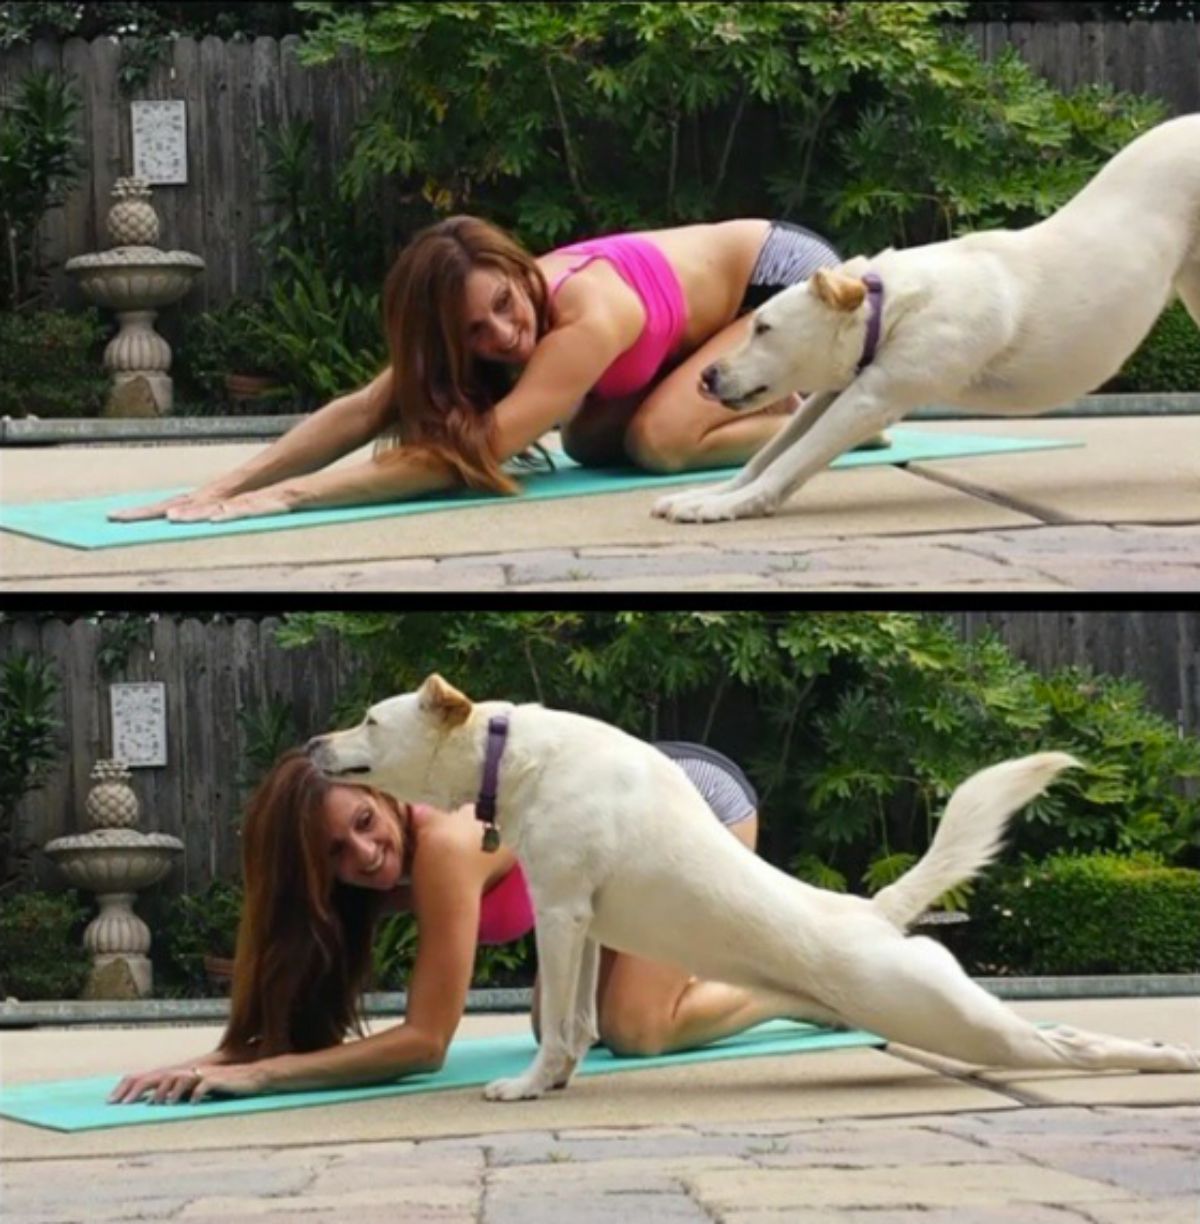 2 photos of a white dog doing downward and upward yoga poses next to a woman